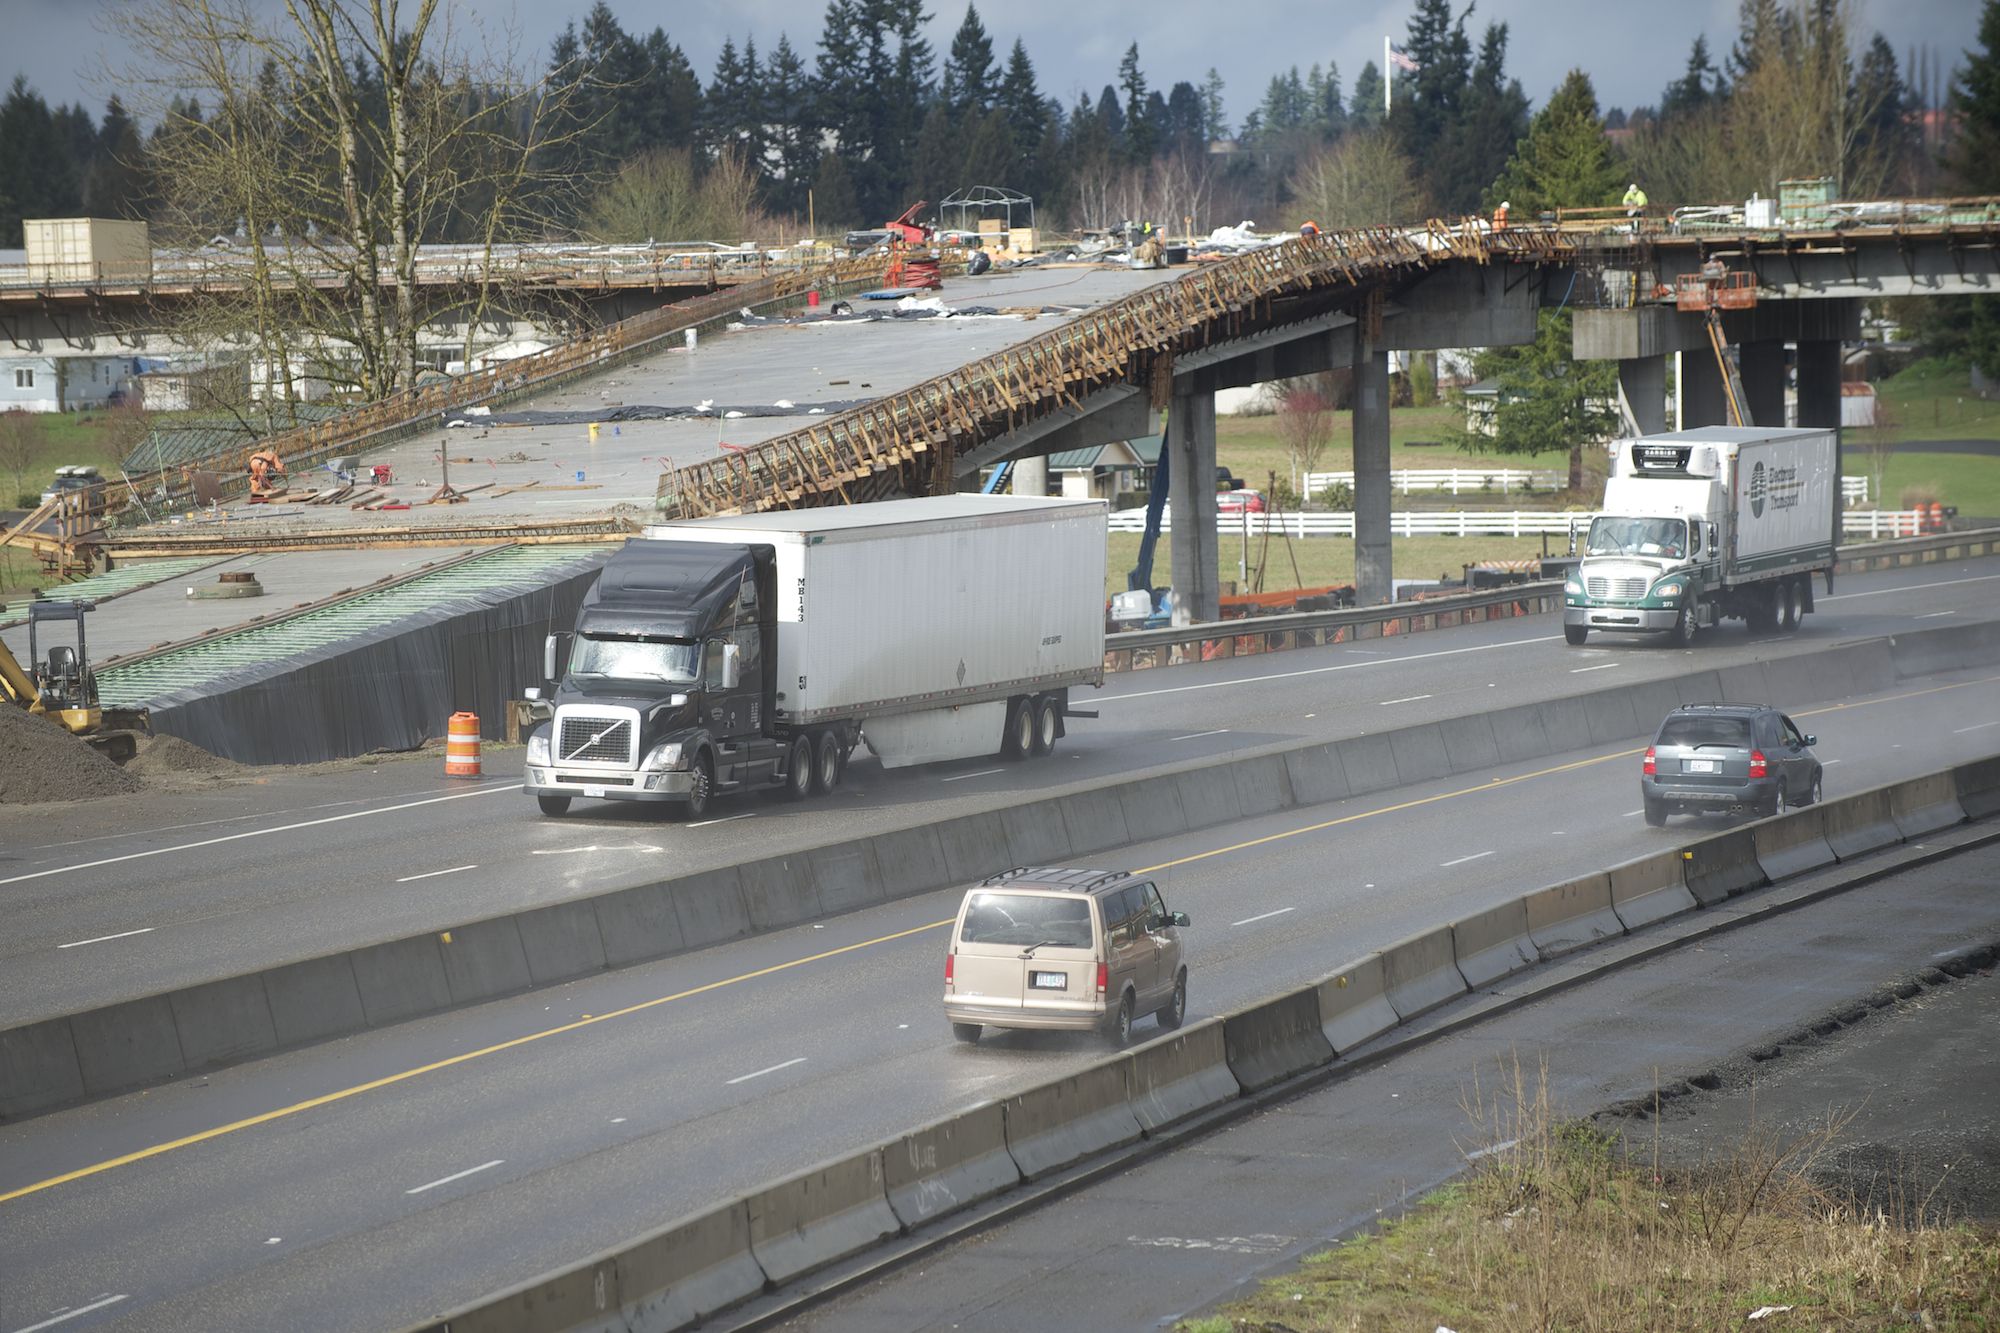 For decades, fuel taxes have been the primary funding source for major transportation projects in Washington, including the Salmon Creek Interchange Project in Clark County.